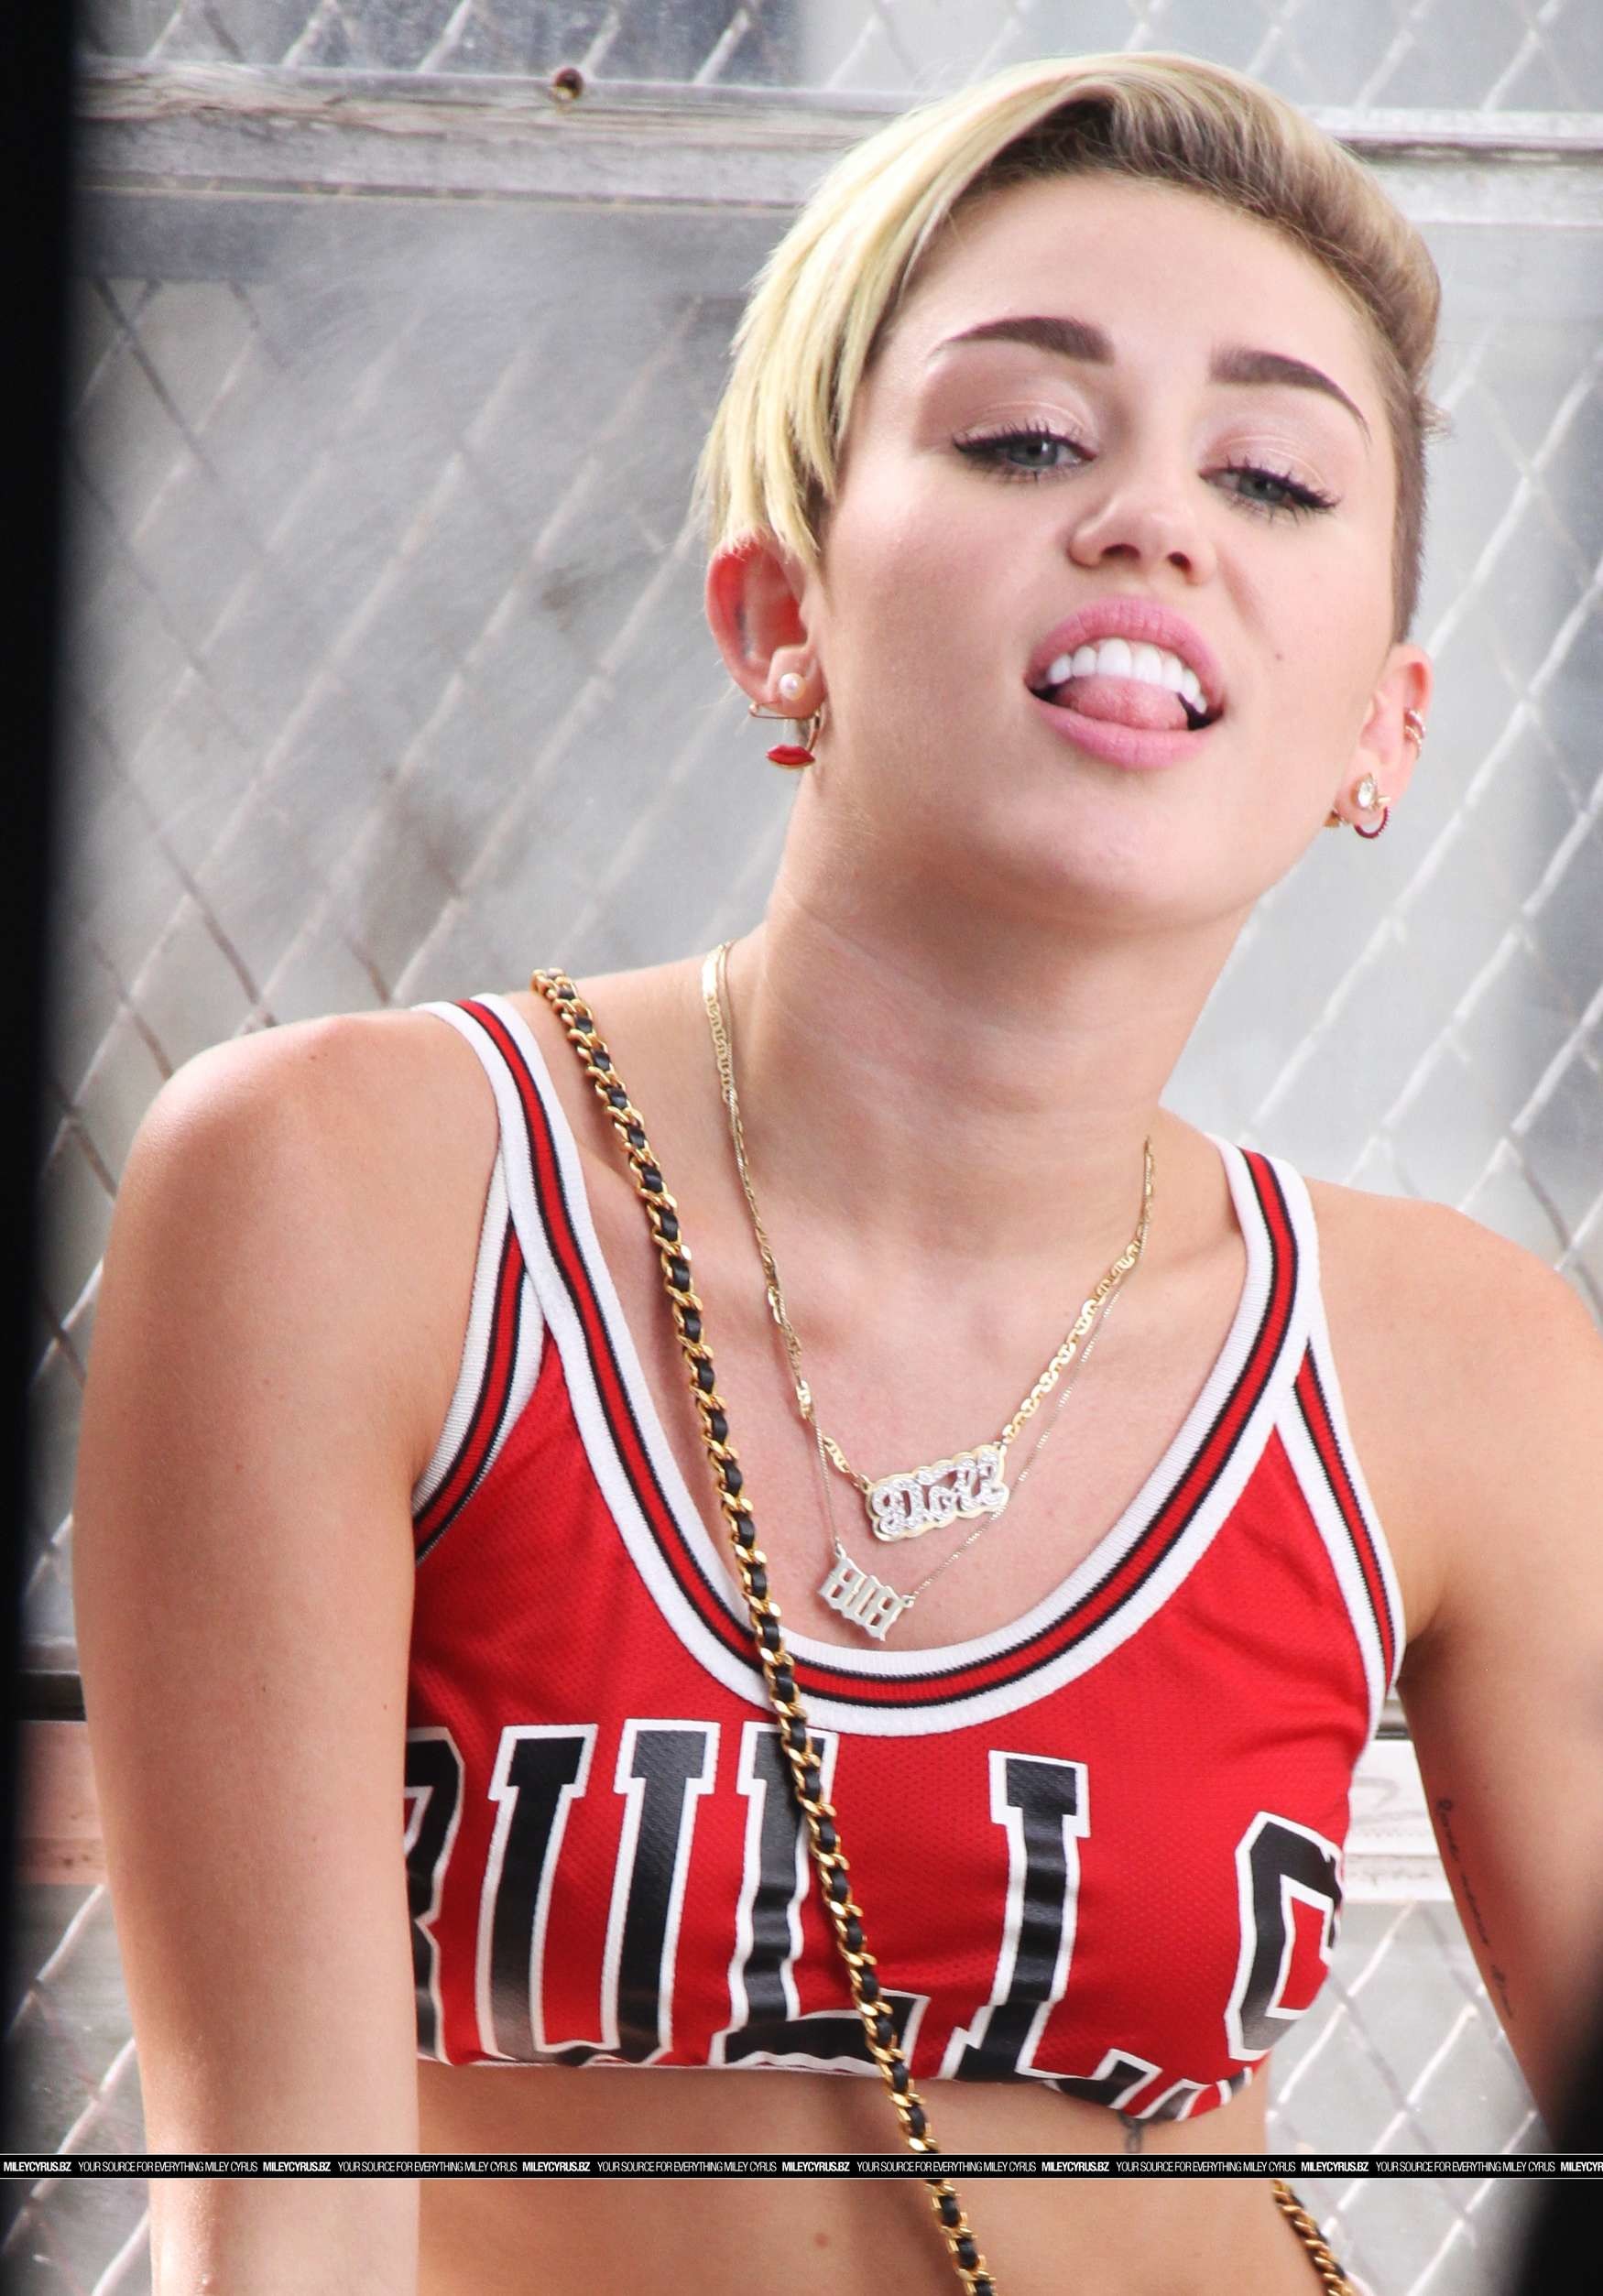 1750x2507 Miley Cyrus 23 Music Video Portraits 16 Full Size 